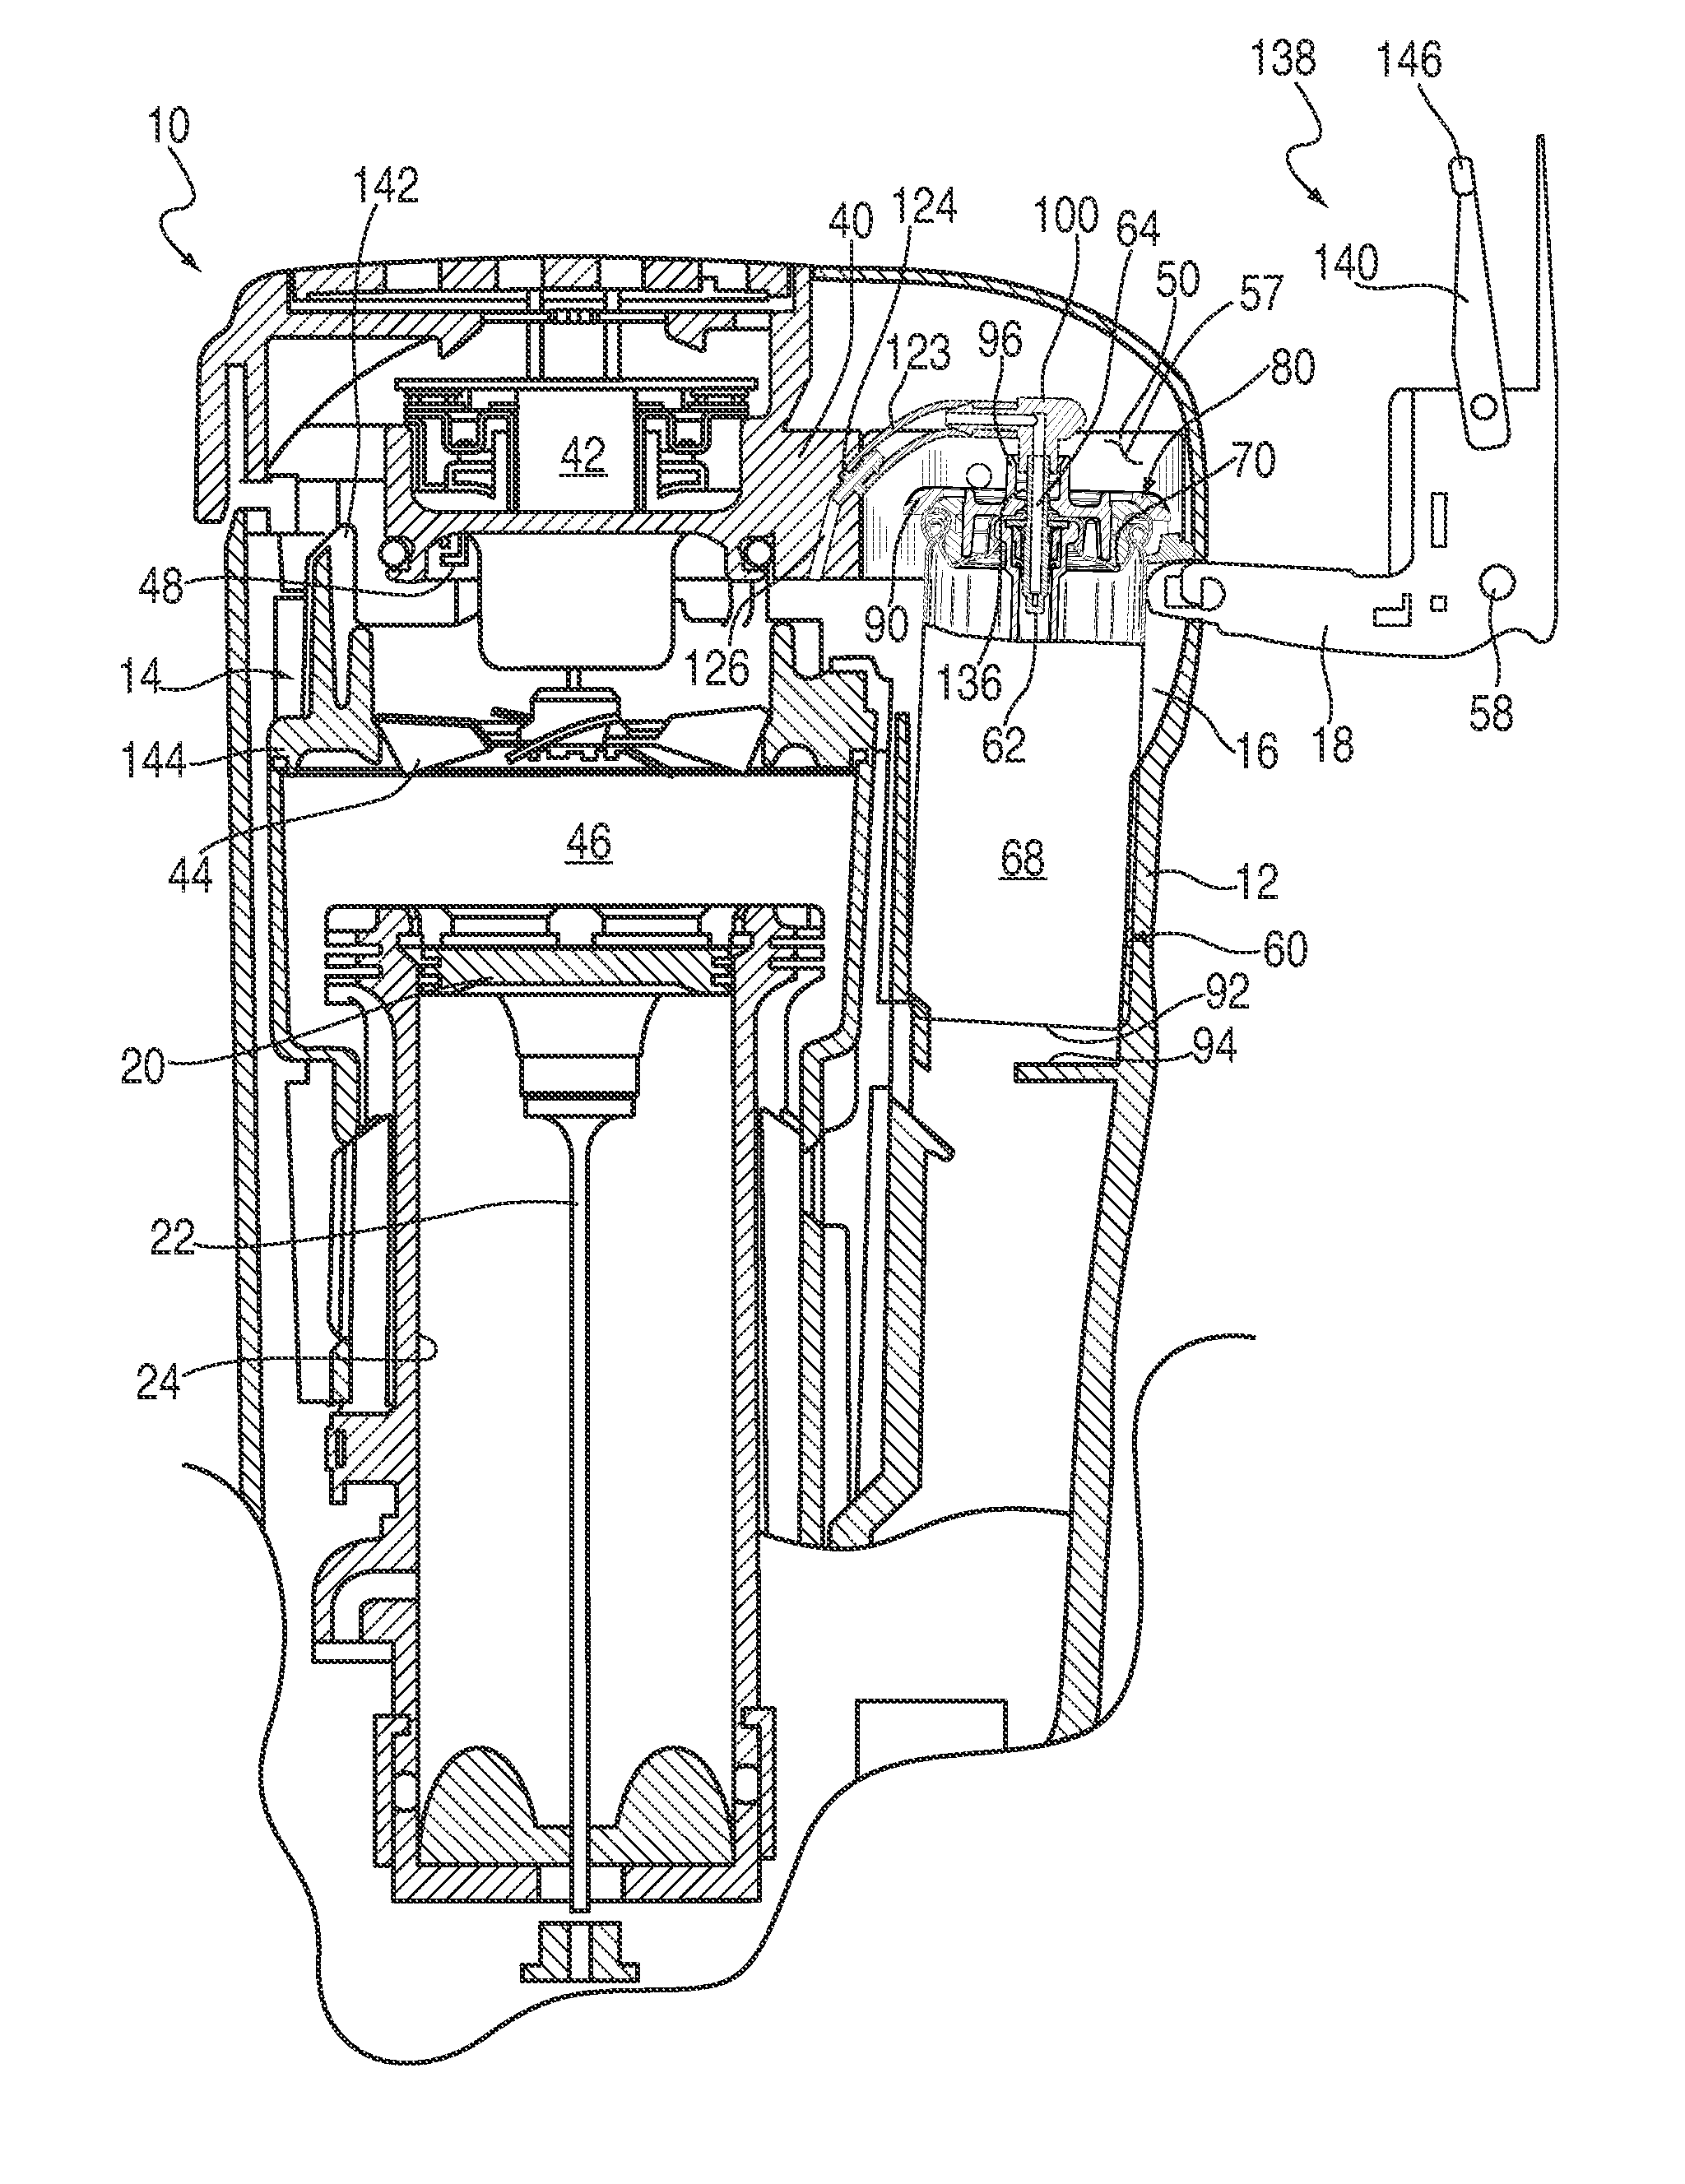 Interface for fuel delivery system for combustion nailer